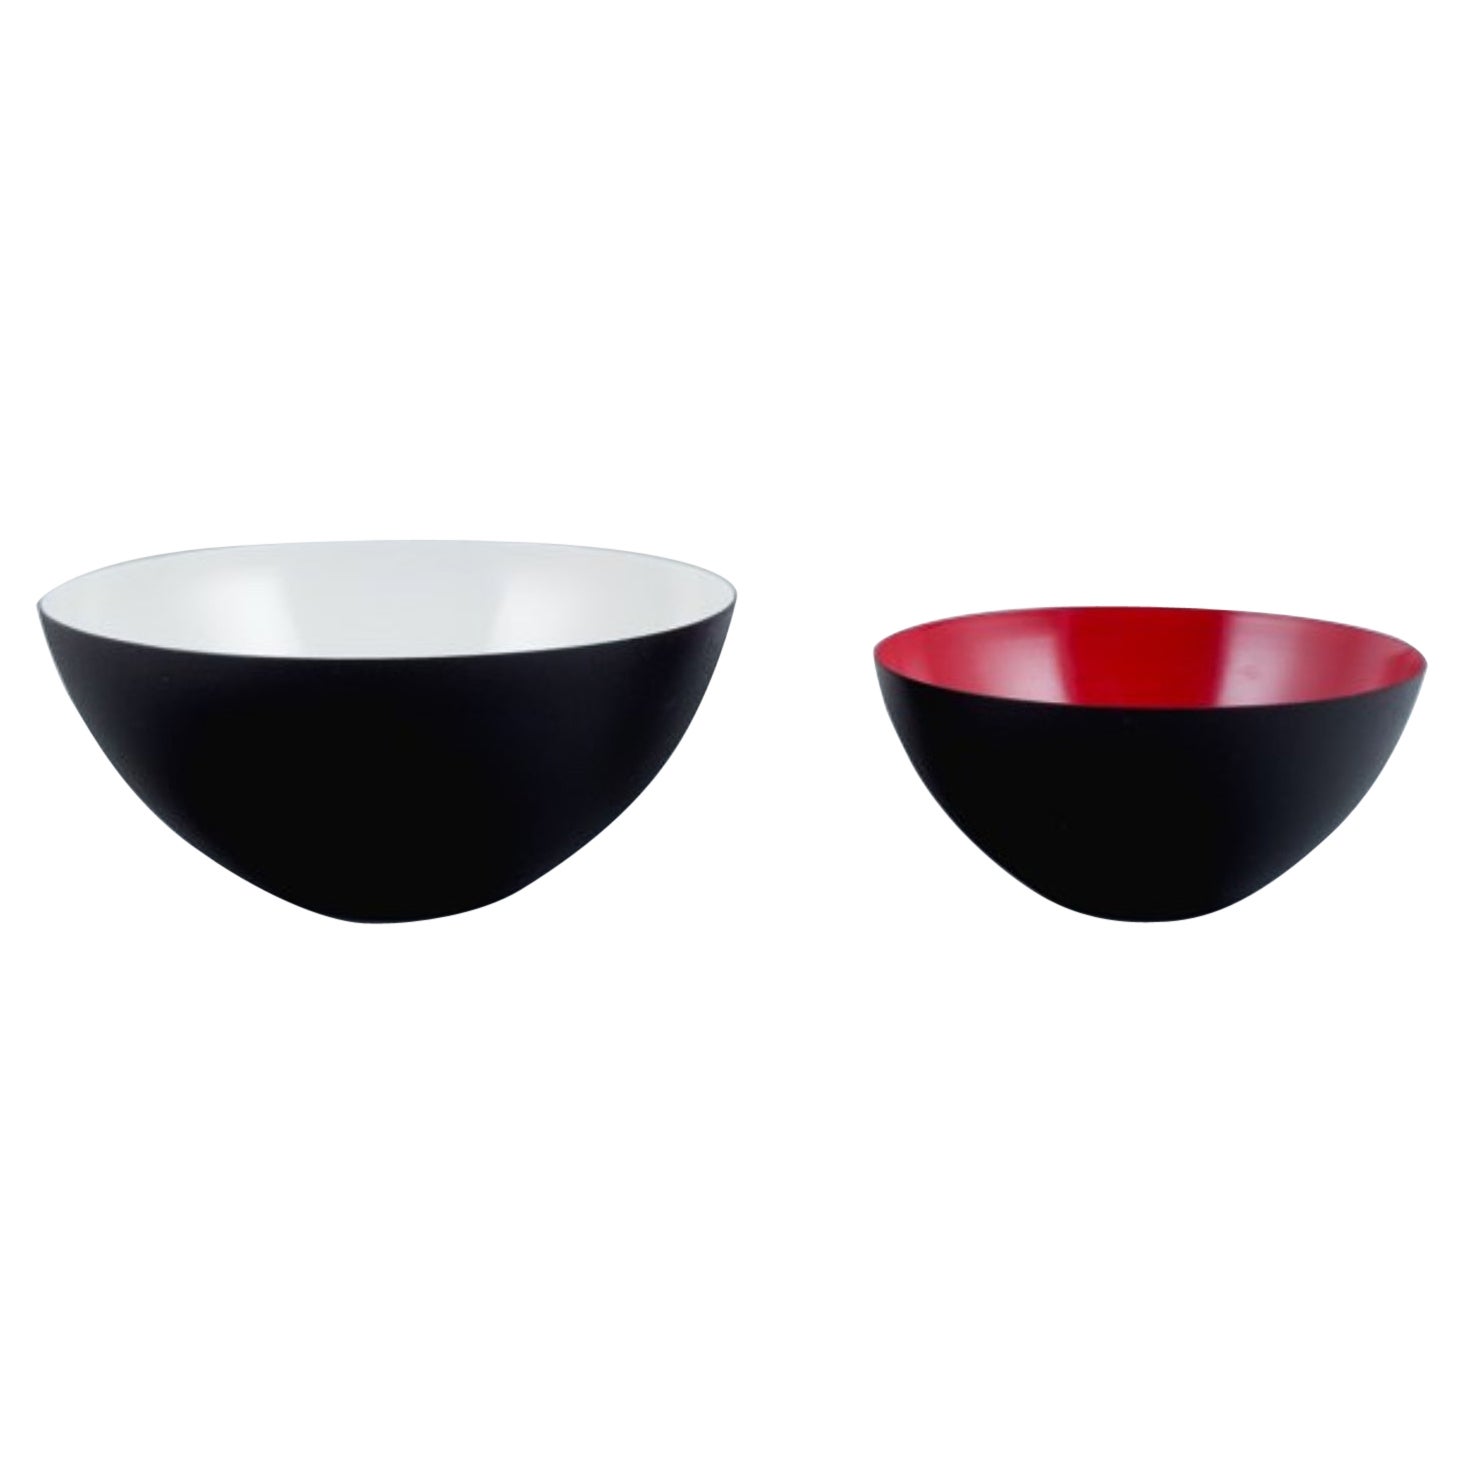 Two Krenit Bowls in Metal, White and Red, Designed by Hermann Krenchel, Denmark For Sale